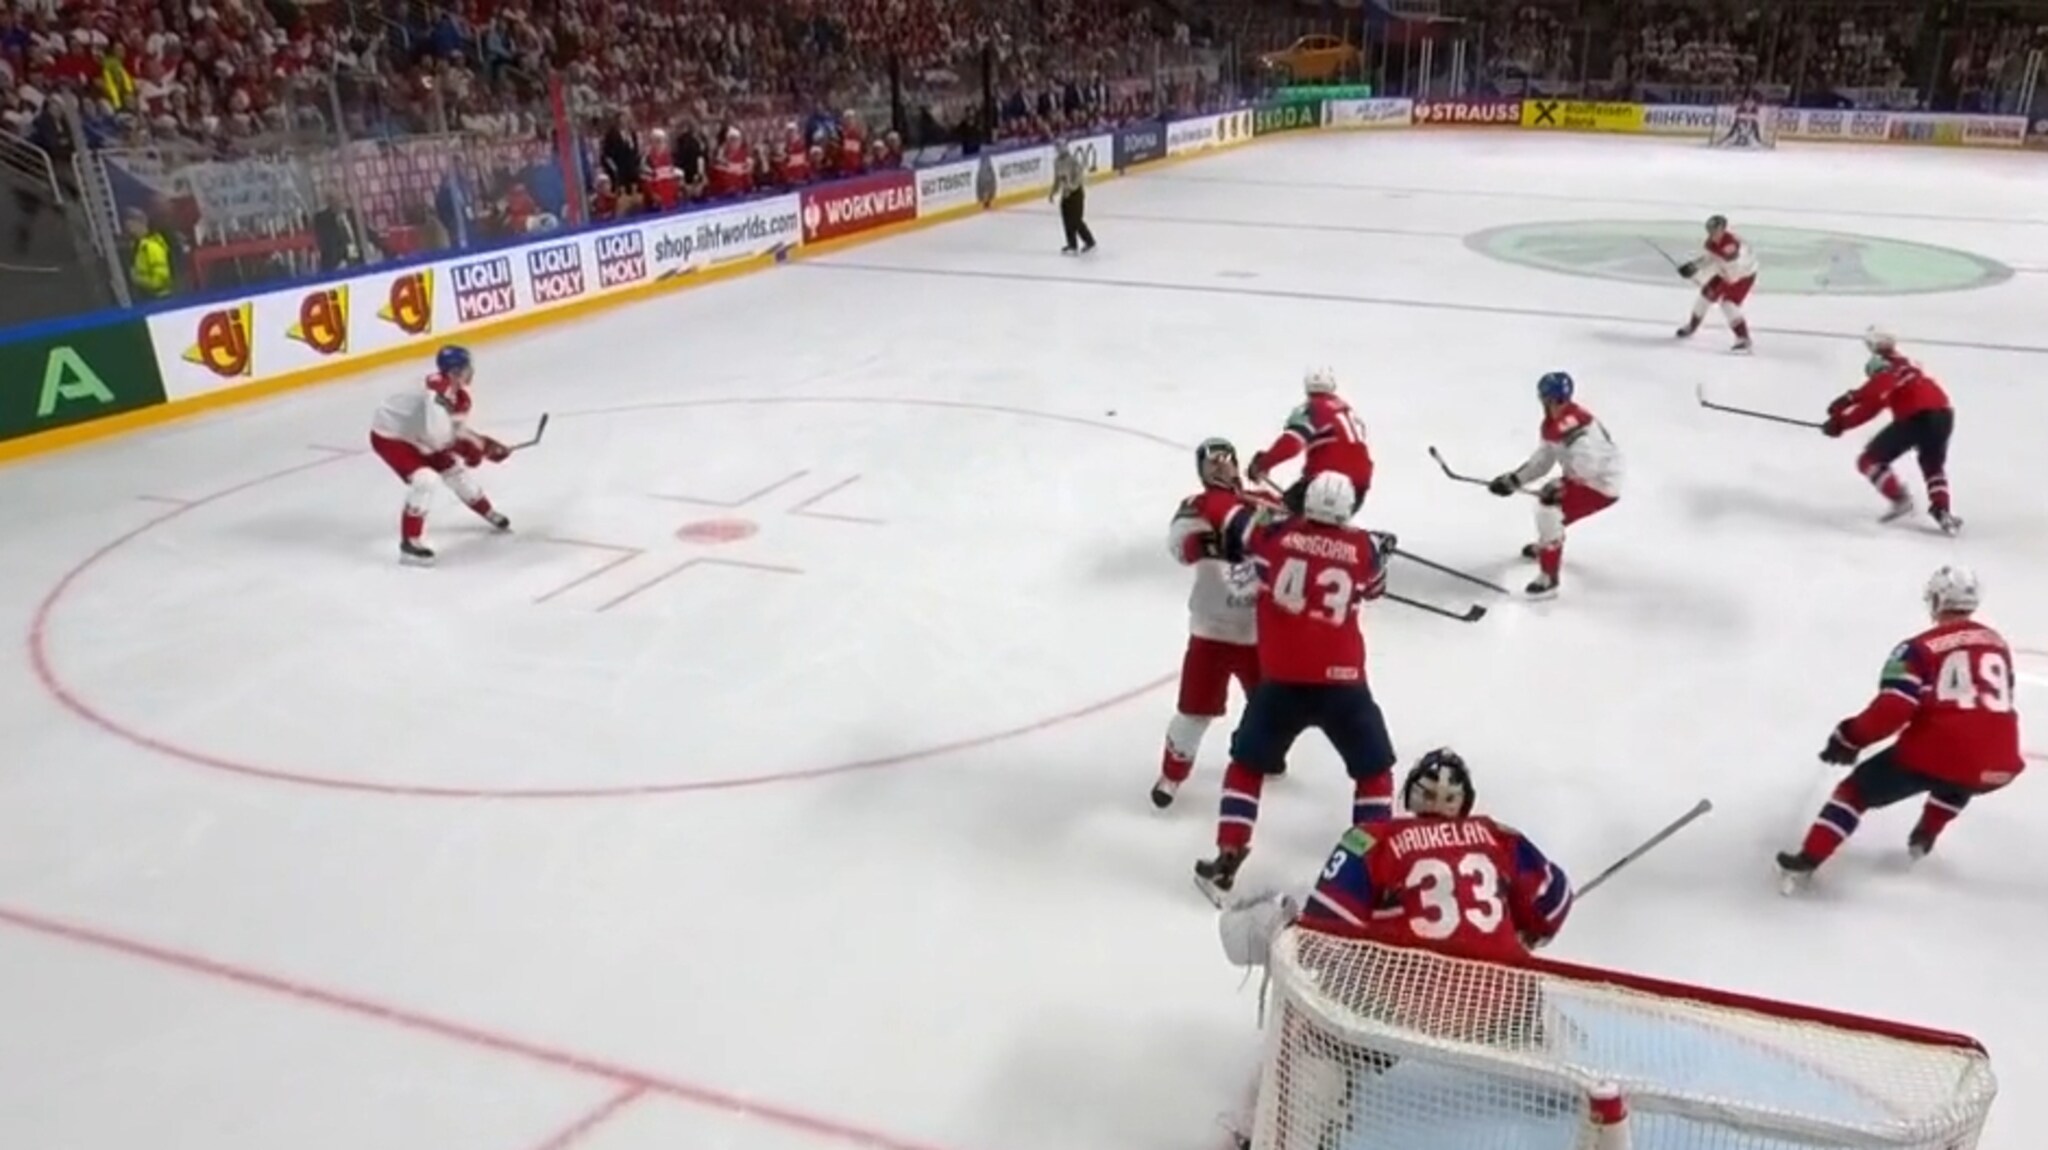 Norway lost to the Czech Republic at the Ice Hockey World Cup